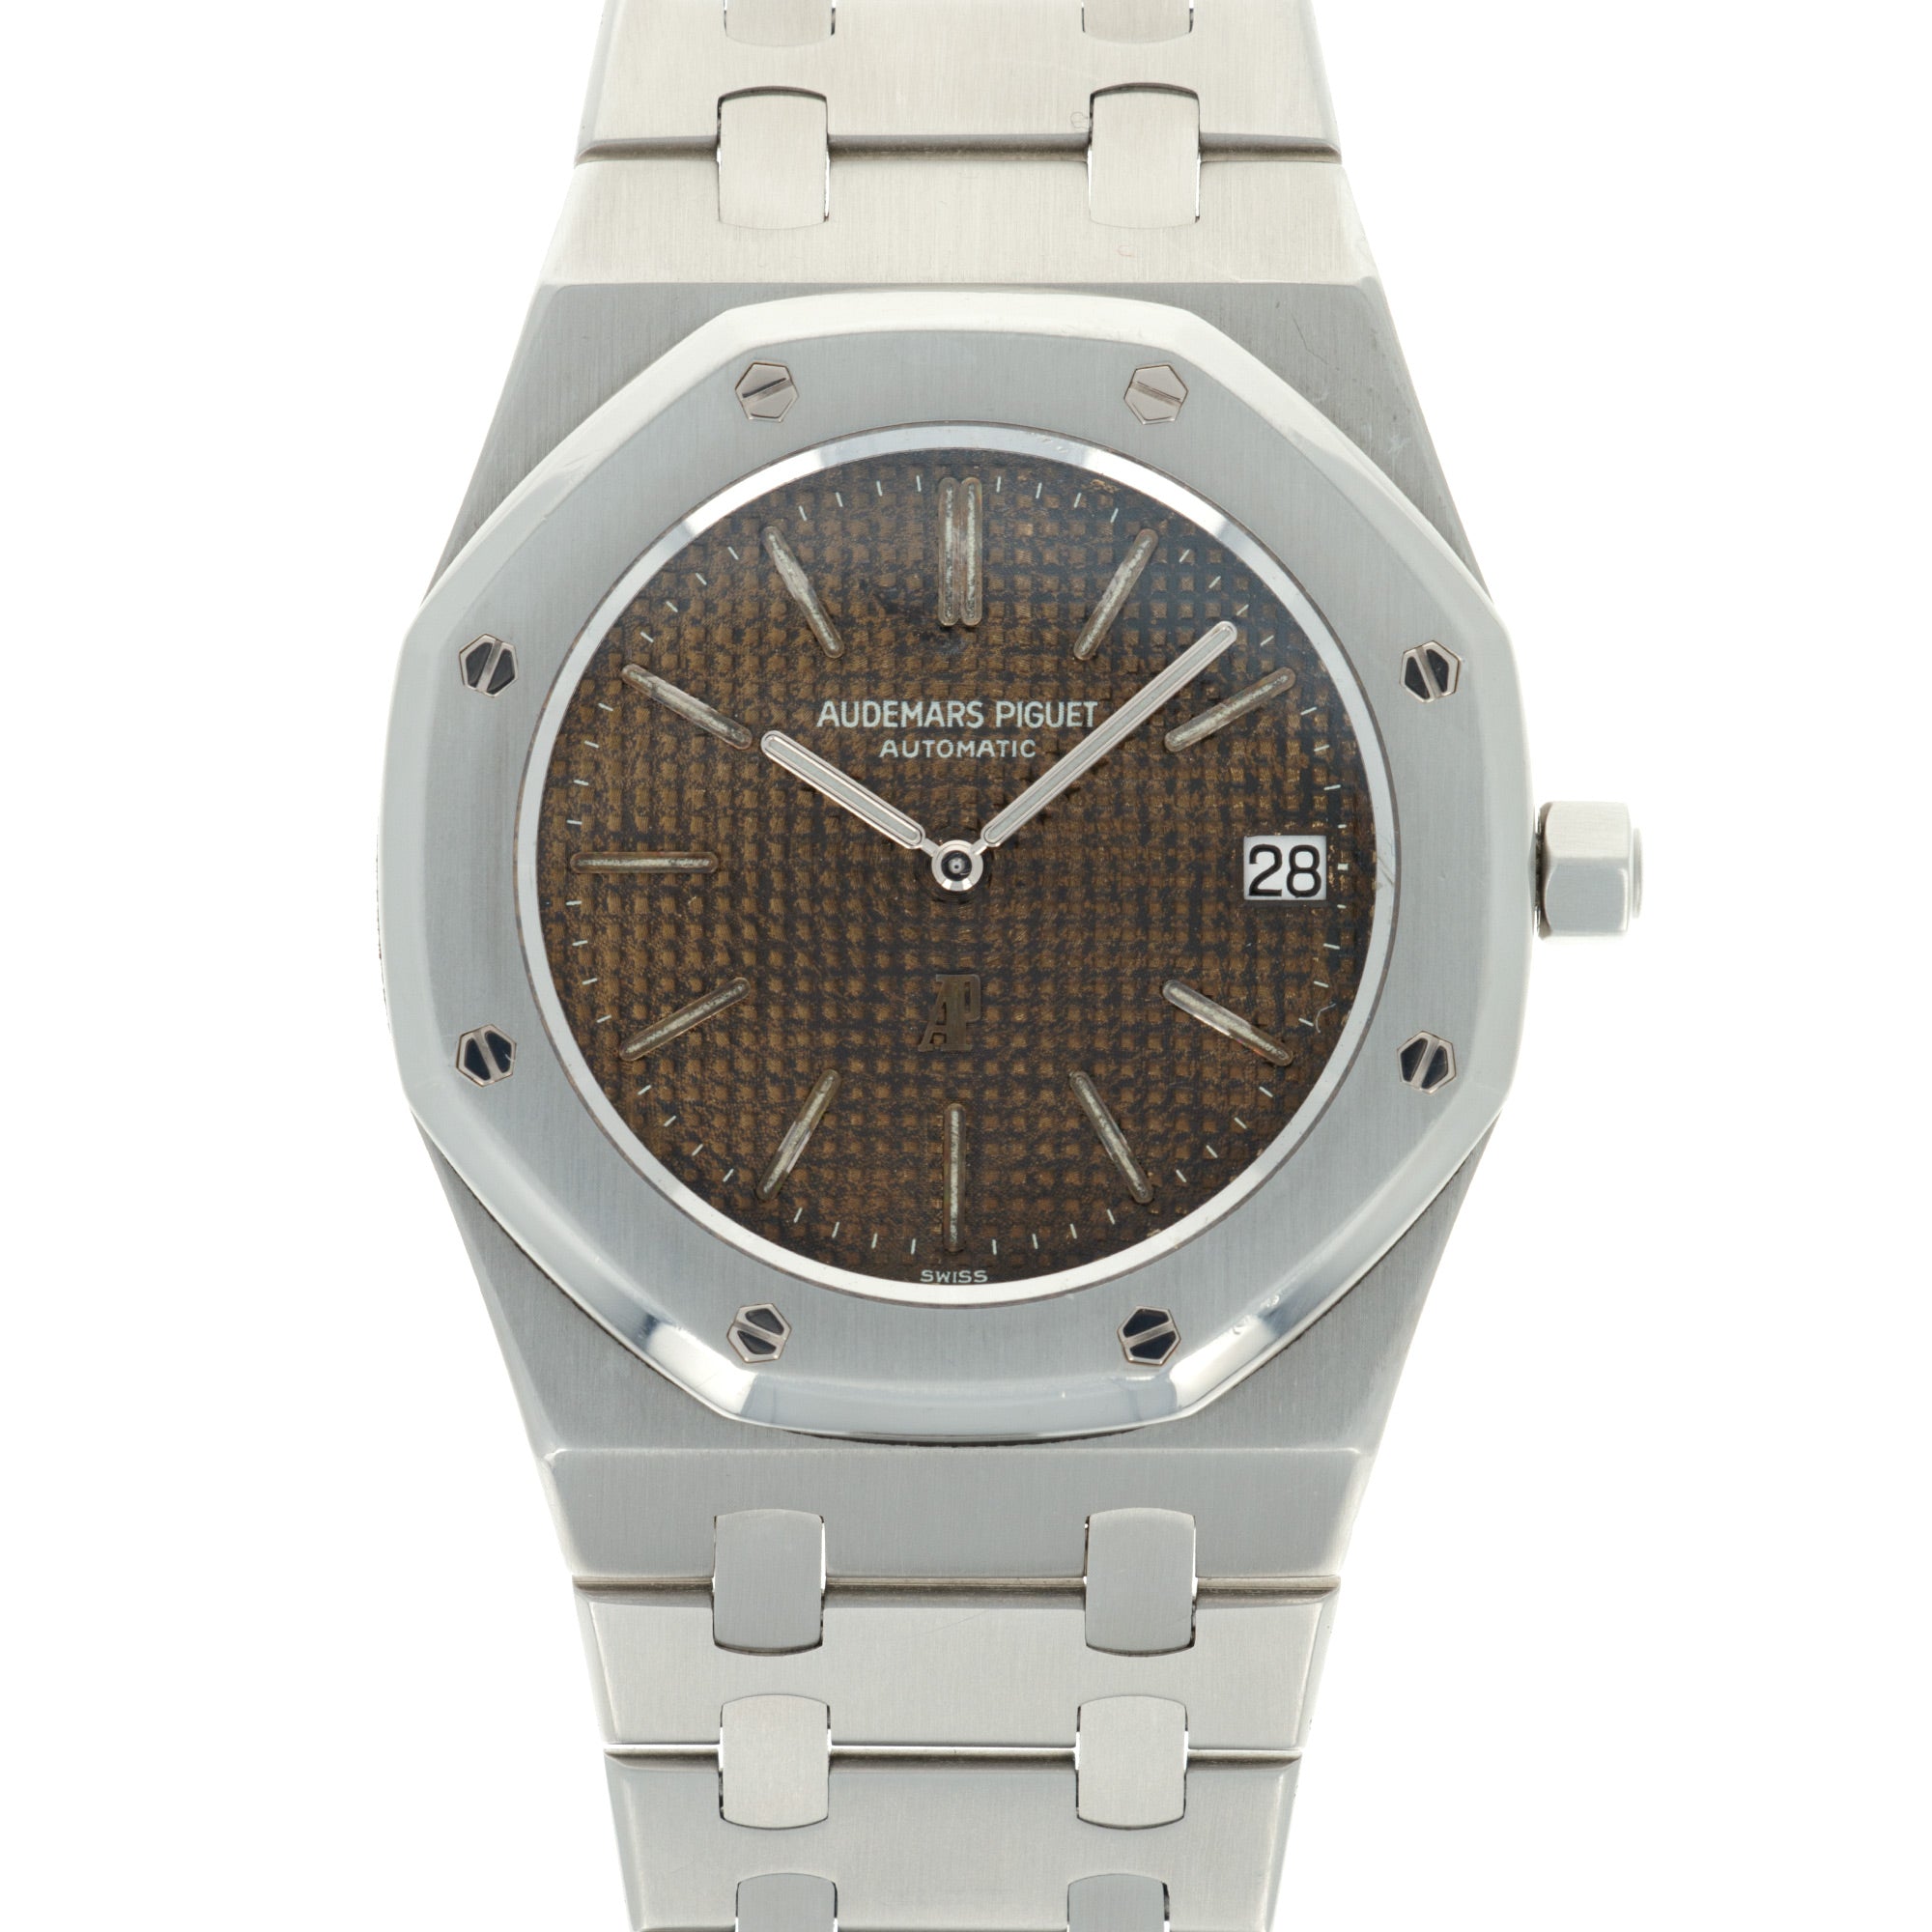 Audemars Piguet - Audemars Piguet Steel Royal Oak Ref. 5402 with Tropical Dial, with Box and Papers - The Keystone Watches